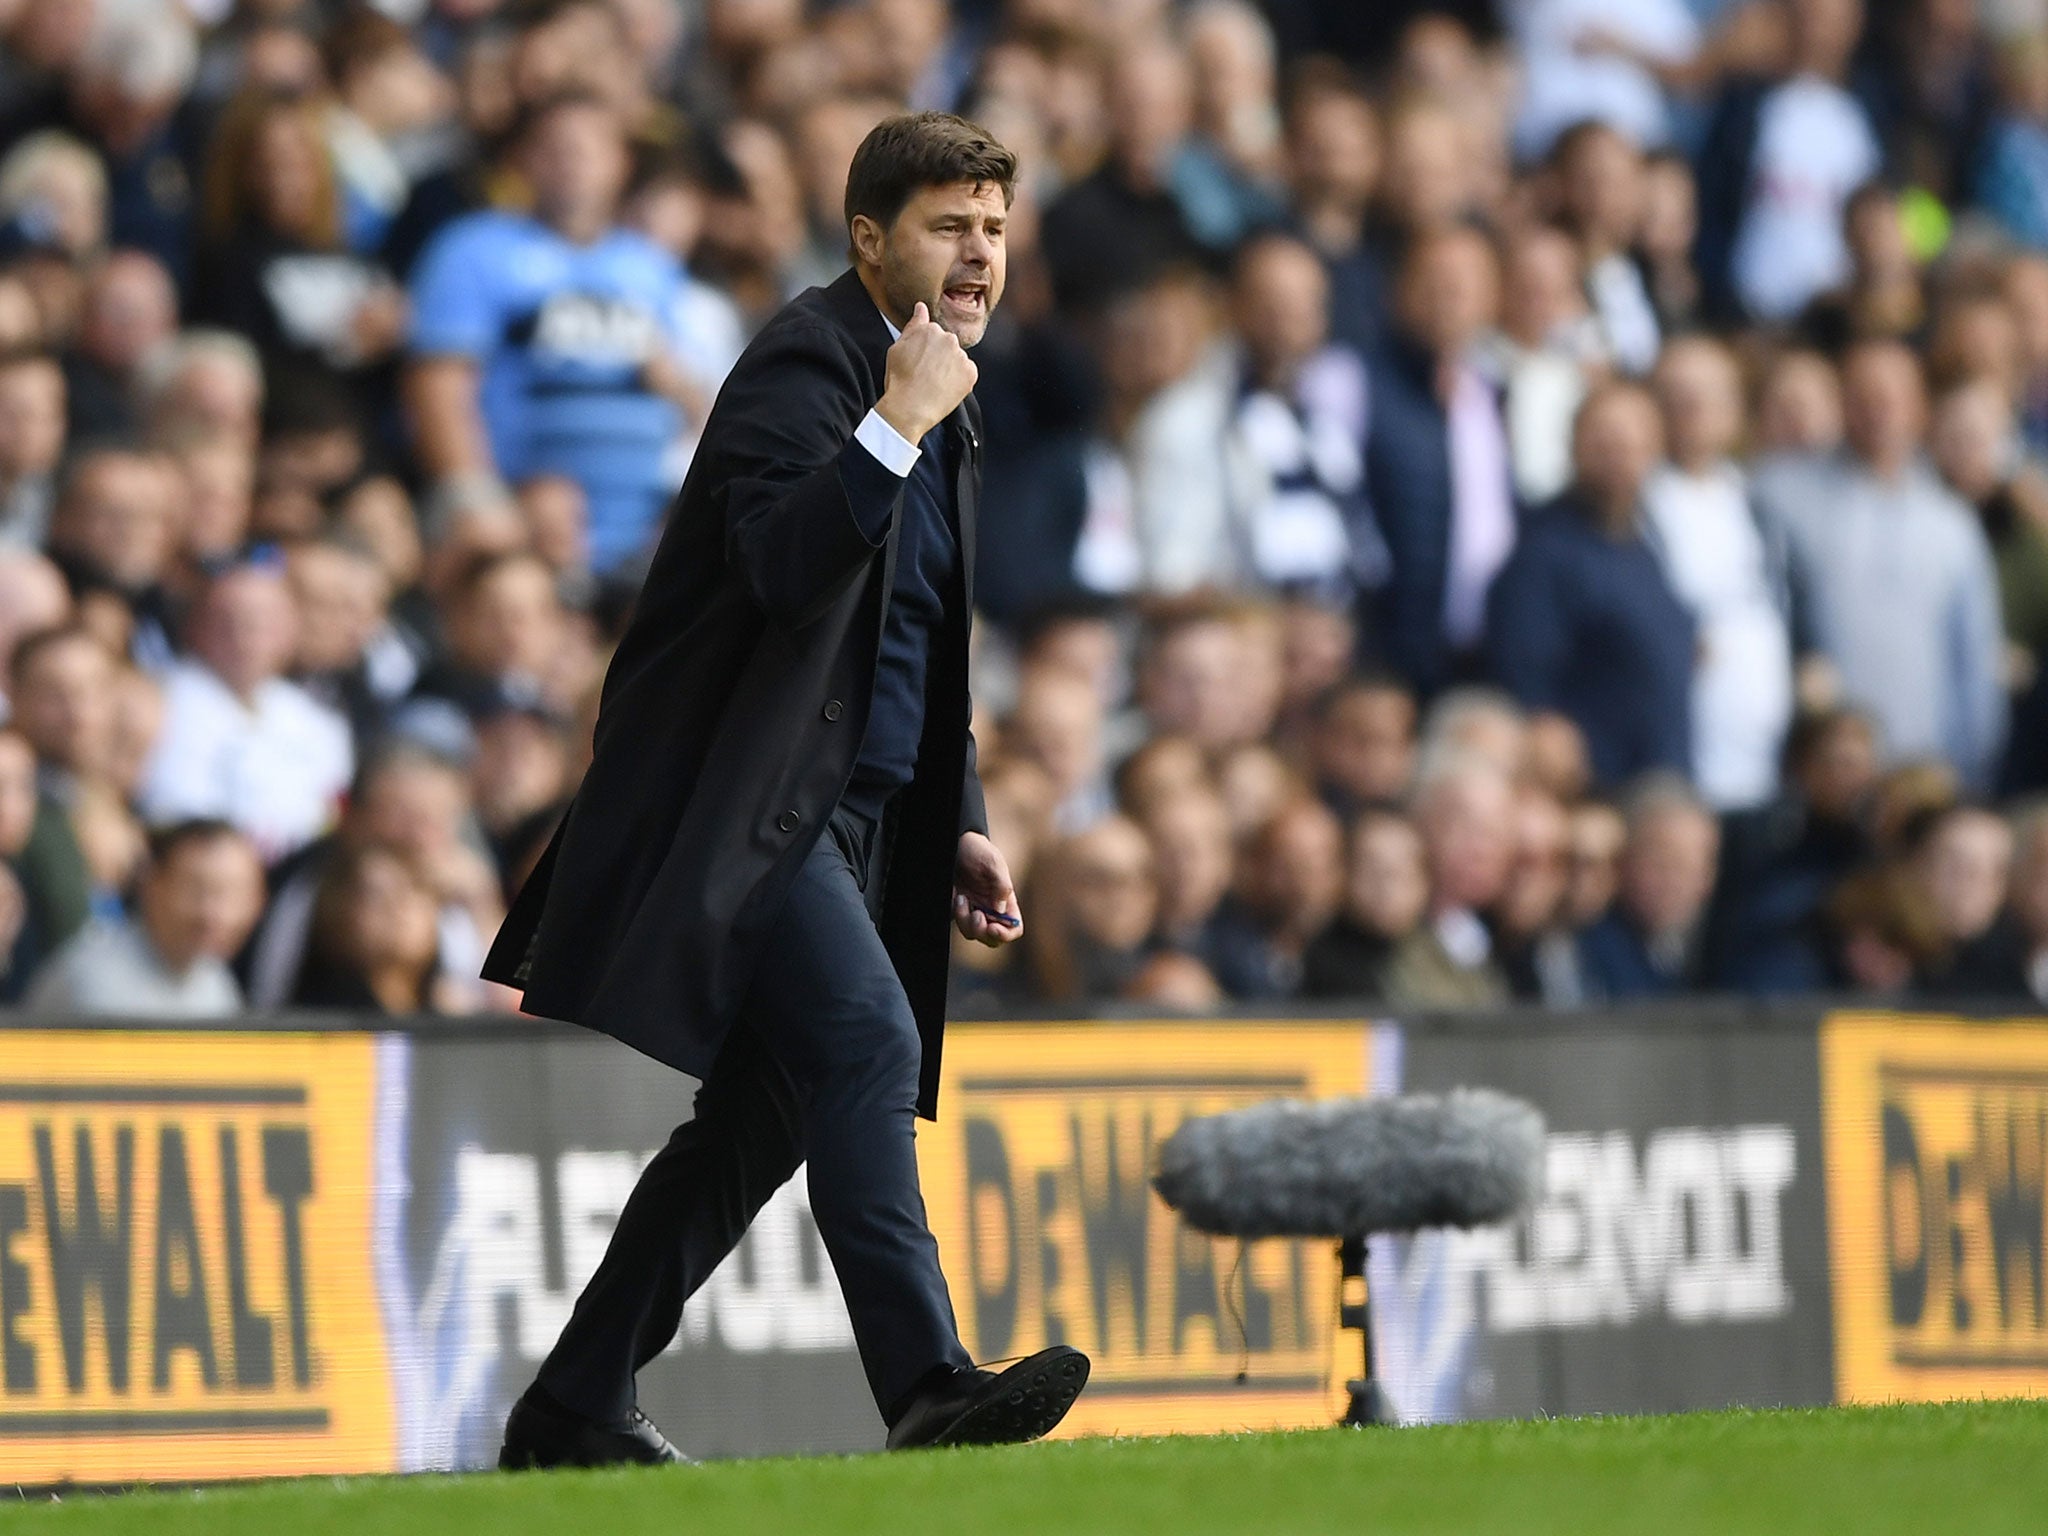 "Pochettino now has the fire in his belly and while it may bring out the nasty side in him, it can only help Tottenham’s cause as they set upon trying to travel the long, arduous road to Premier League glory"